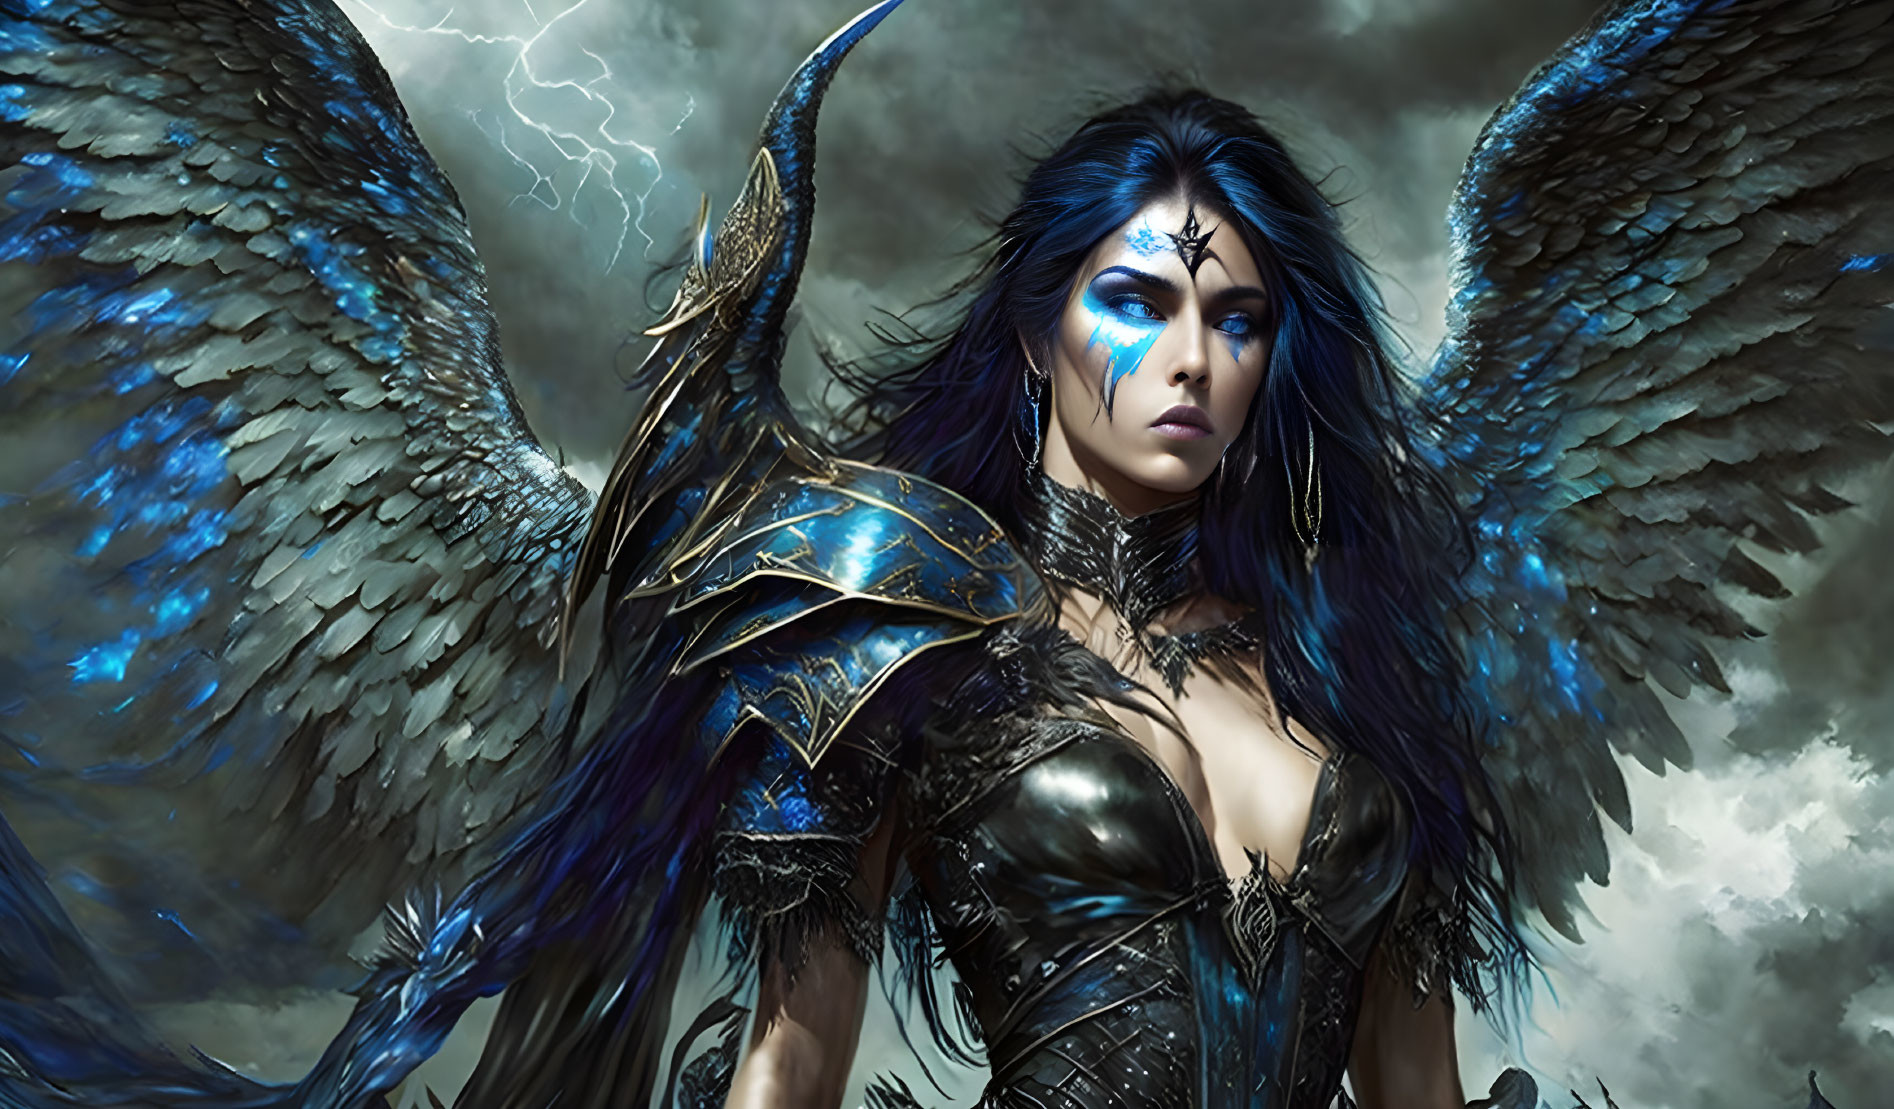 Fantasy illustration of woman with blue skin, armor, wings, stormy backdrop